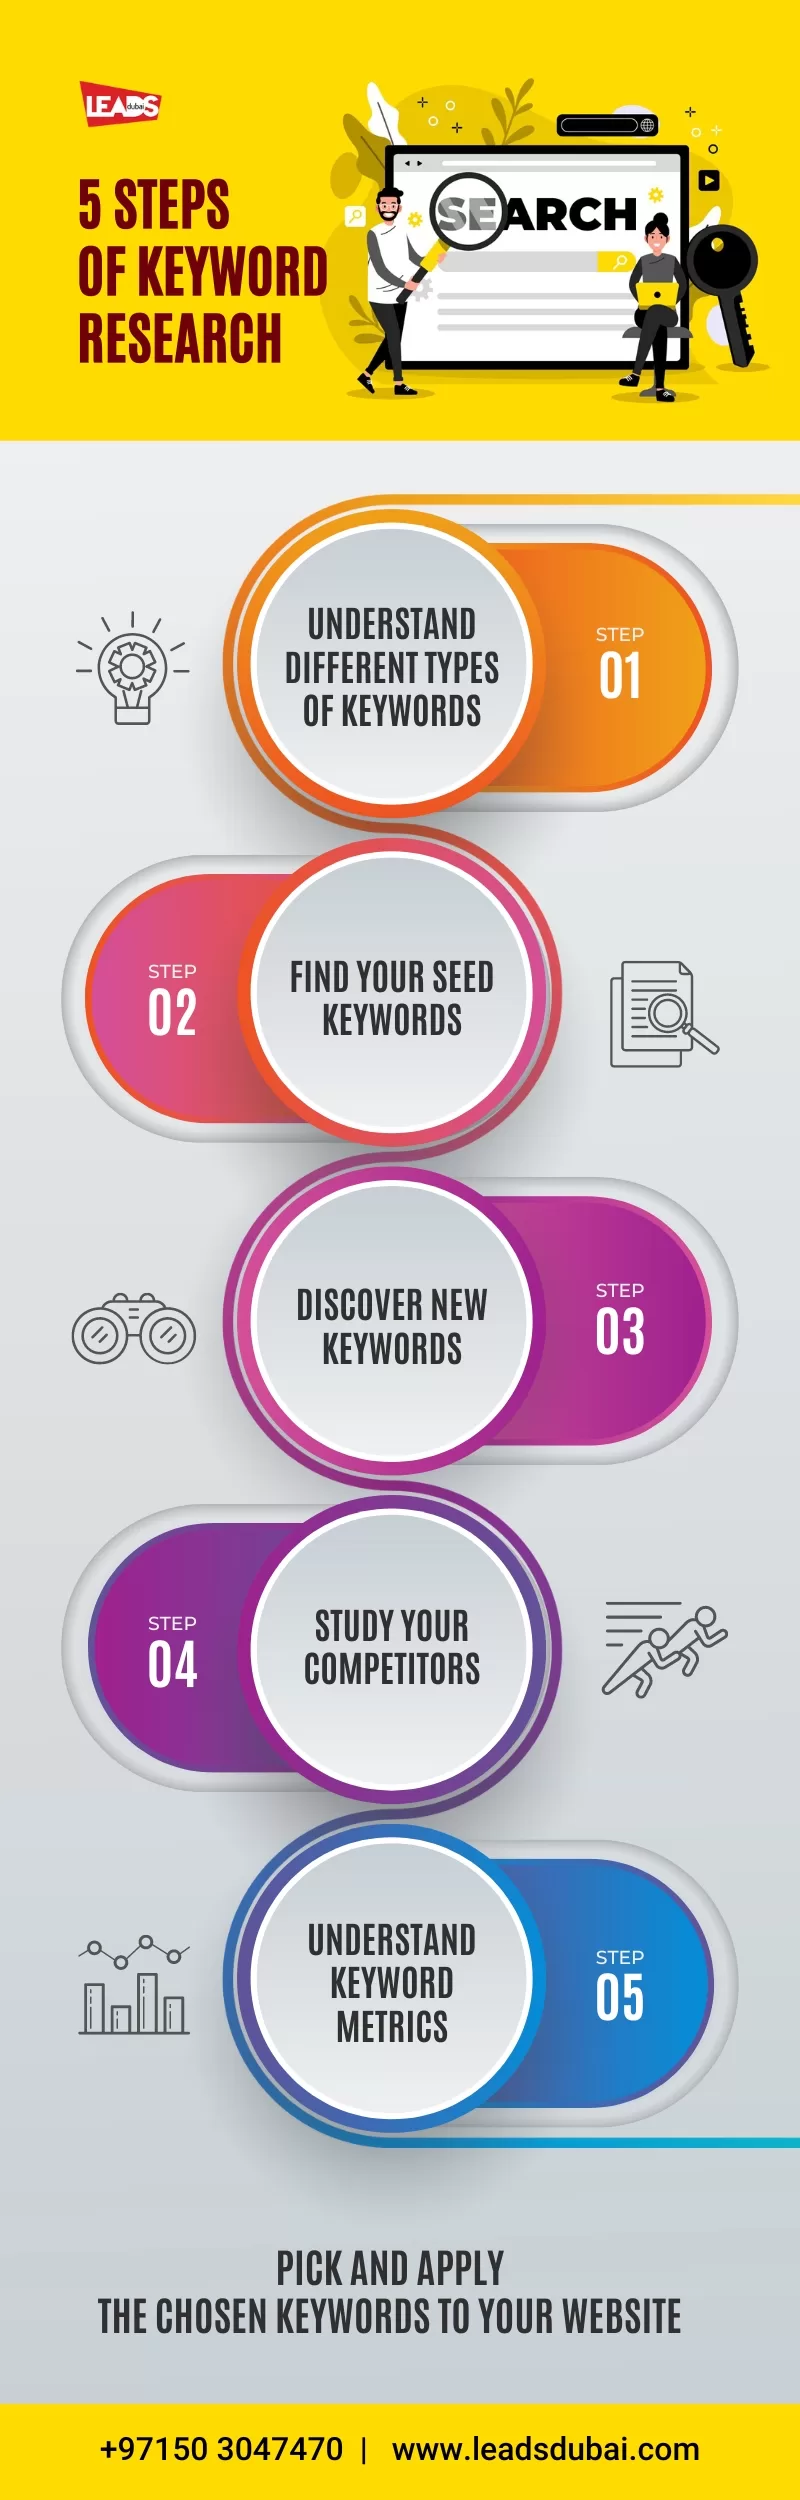 5 Steps of Keyword Research